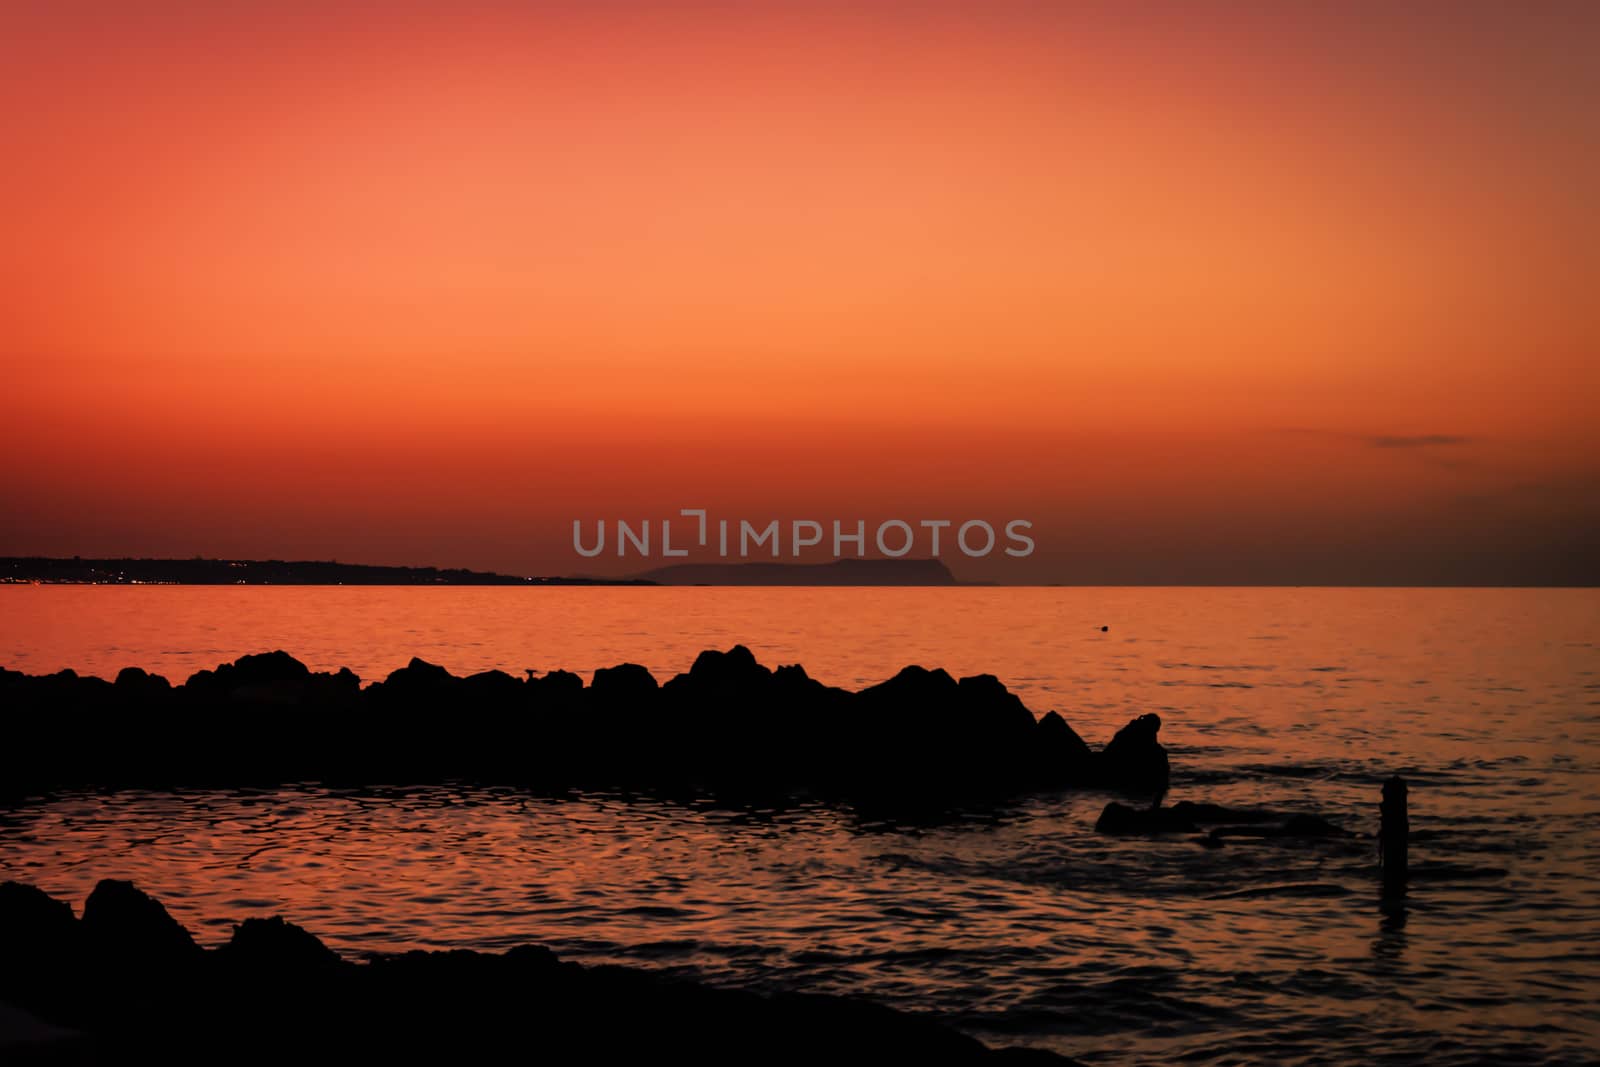 Skyline after sundown. Scenery of orange sky with rock silhouette and ocean waves. Orange sunset at shoreline photography. Waterfront tranquility in paradise on vacations. Majestic horizon wallpaper.